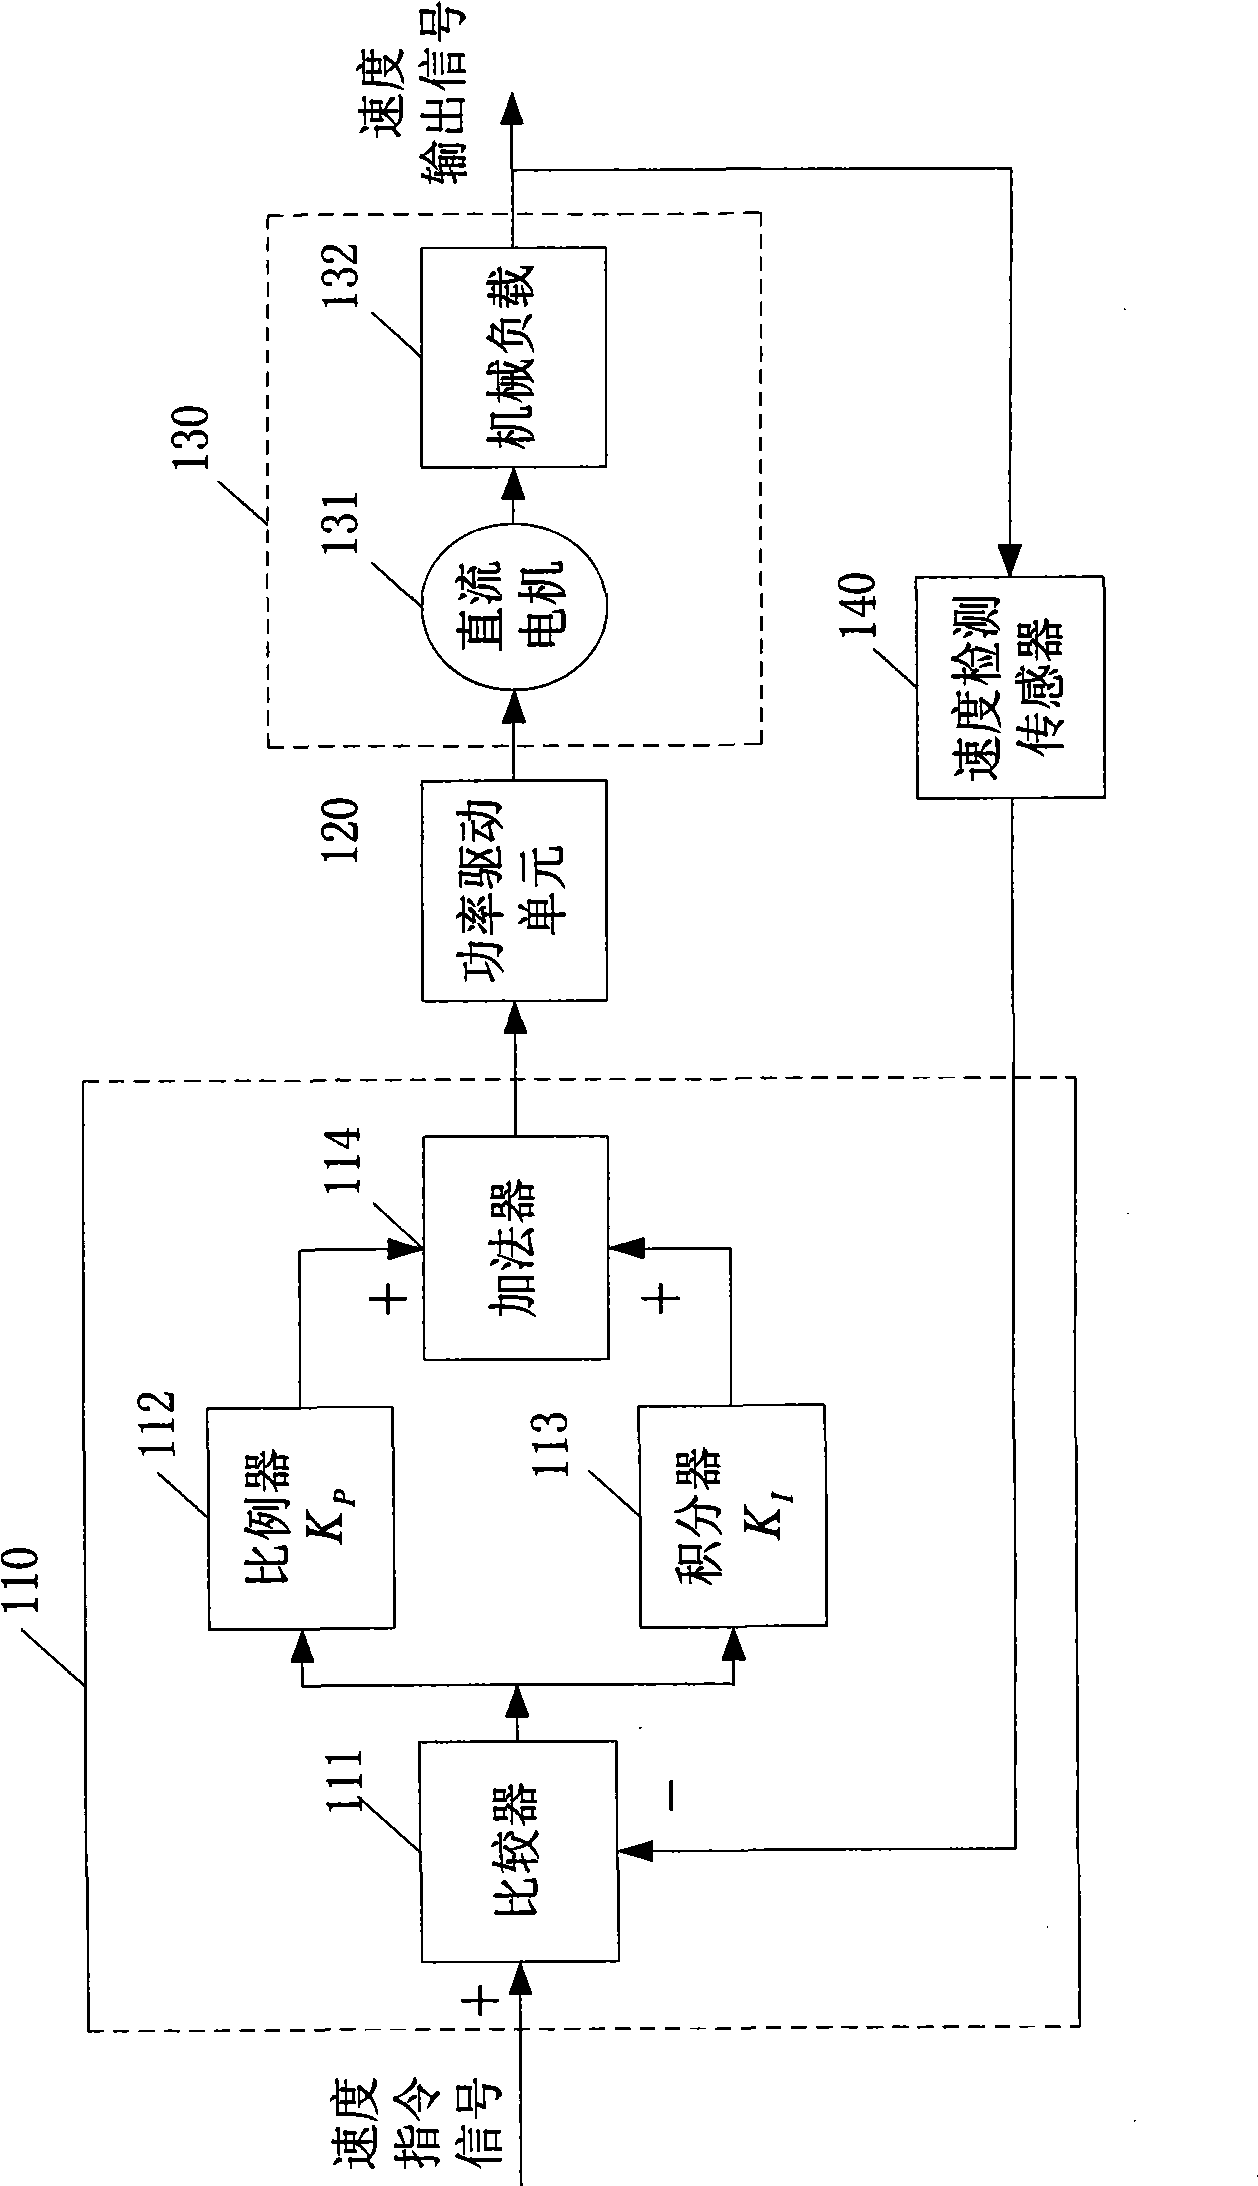 PID control system for DC motor speed and control method thereof